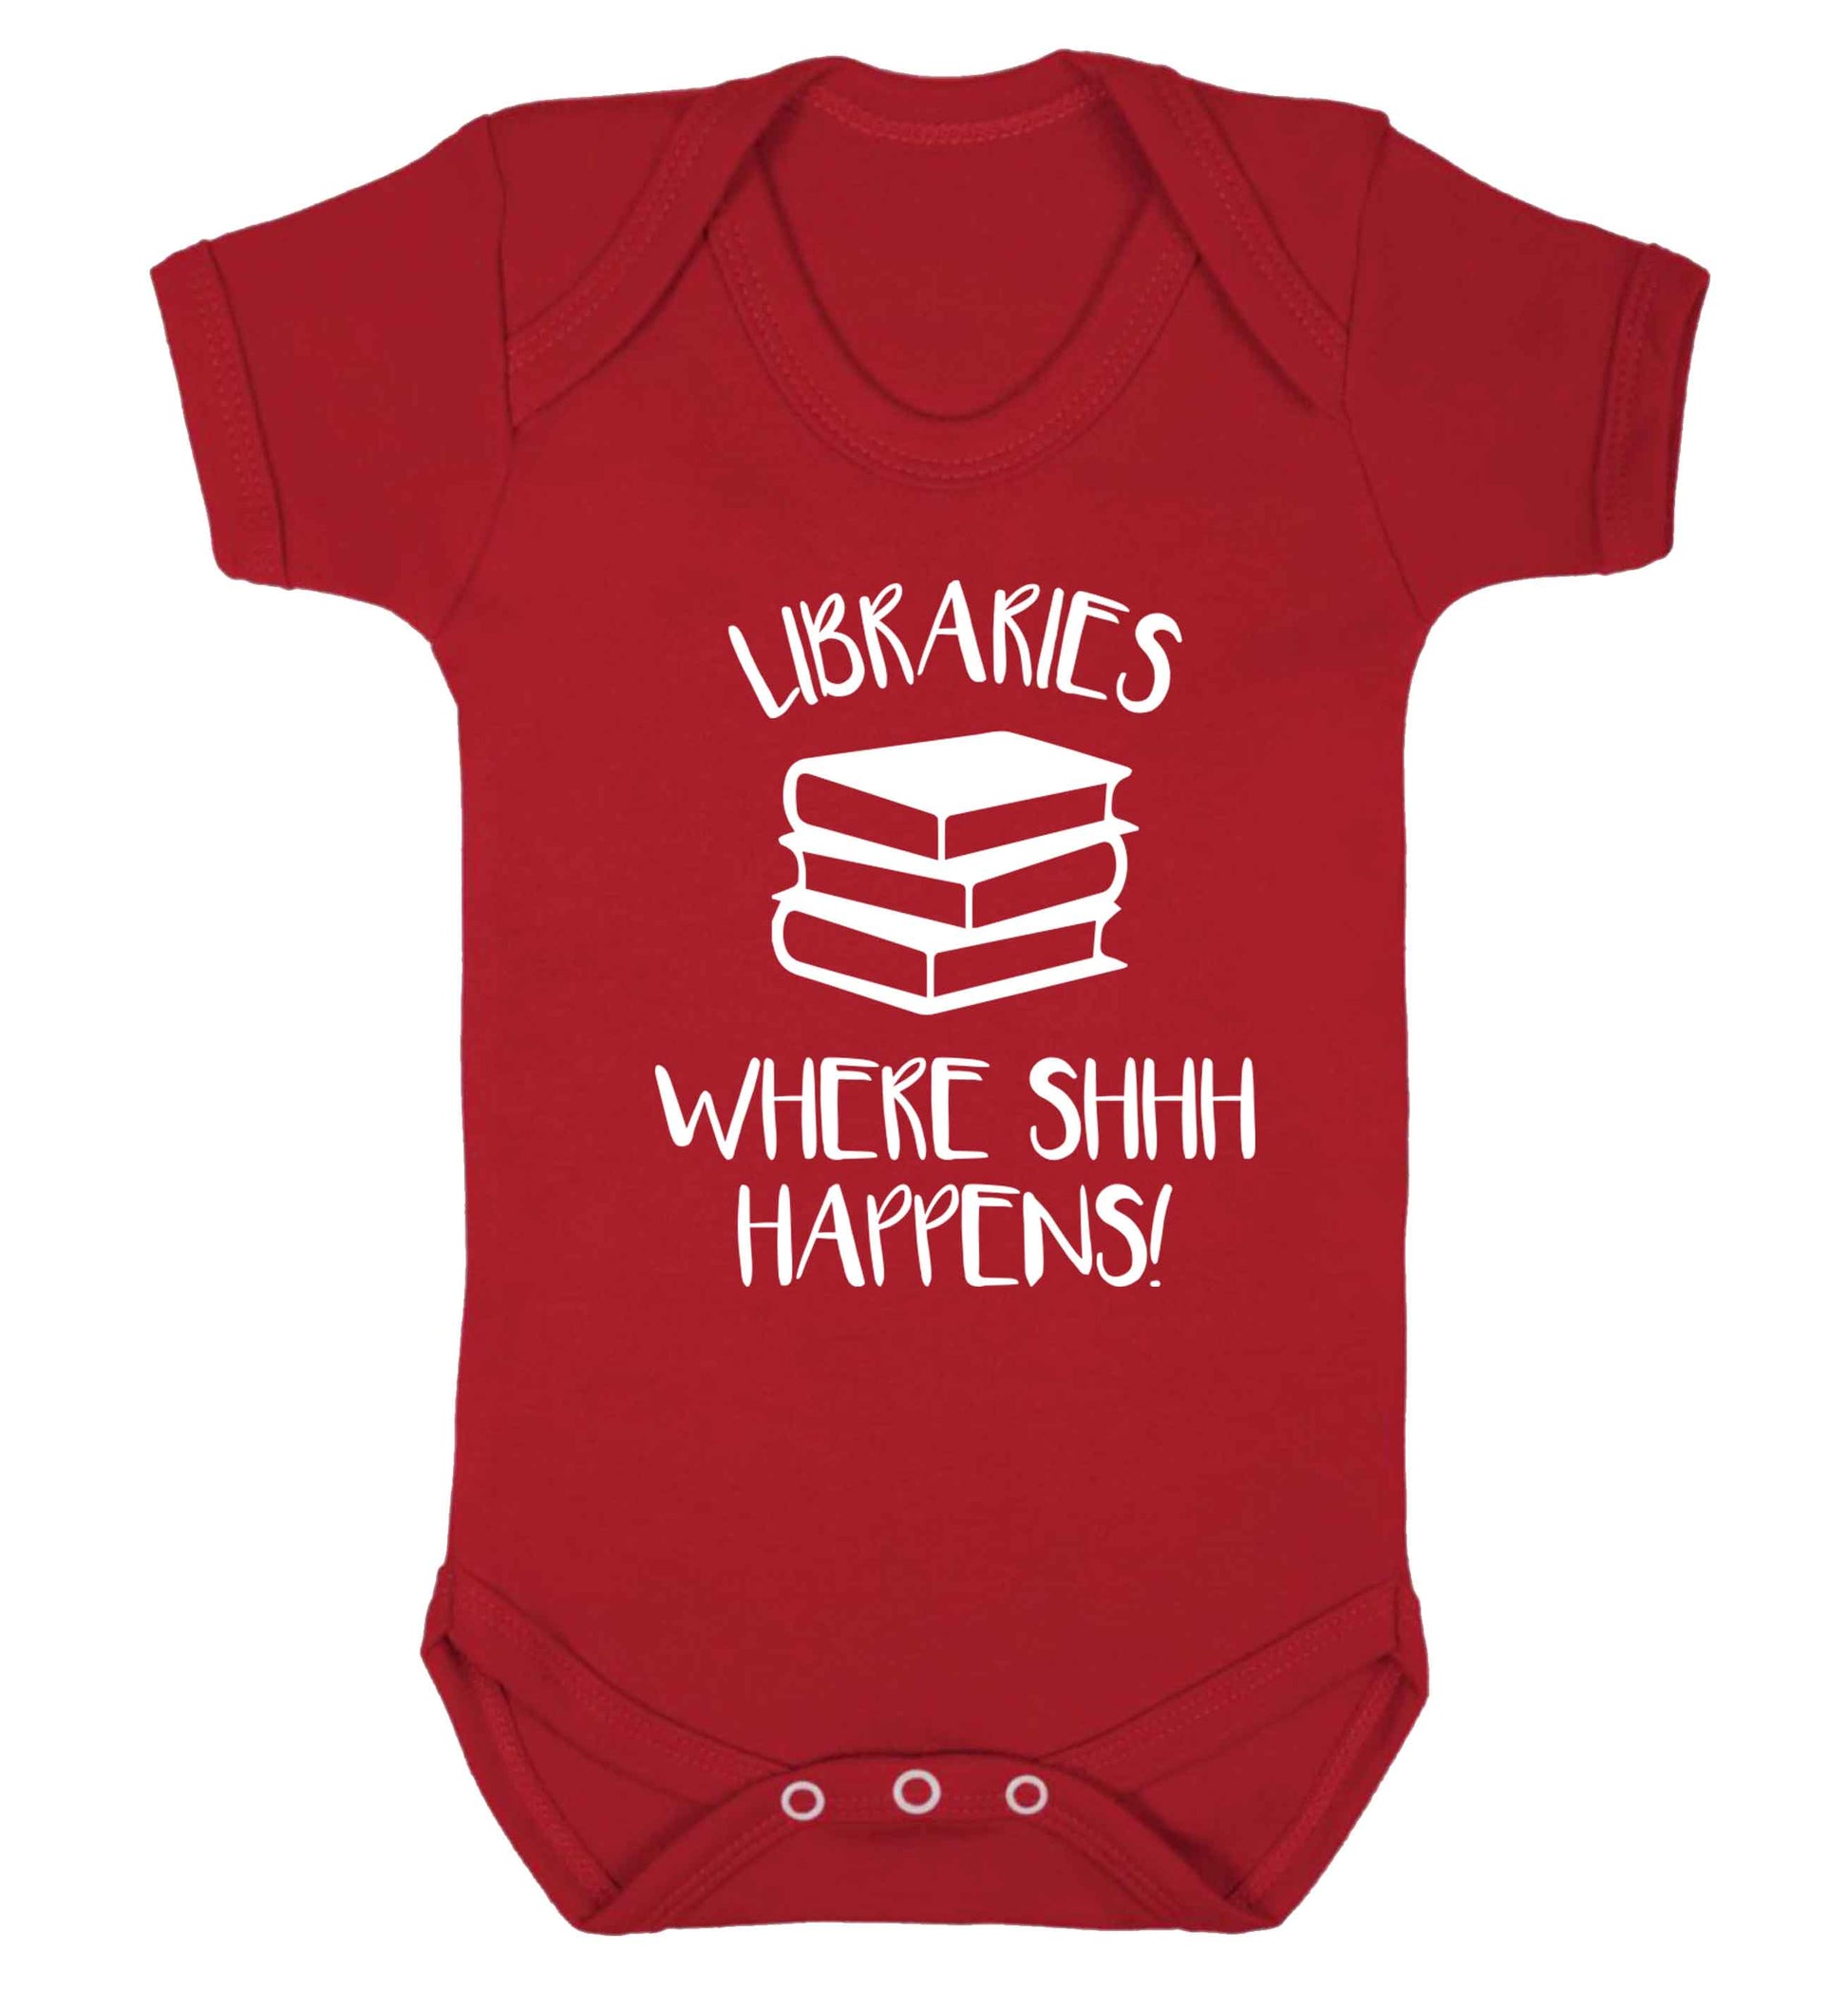 Libraries where shh happens! Baby Vest red 18-24 months